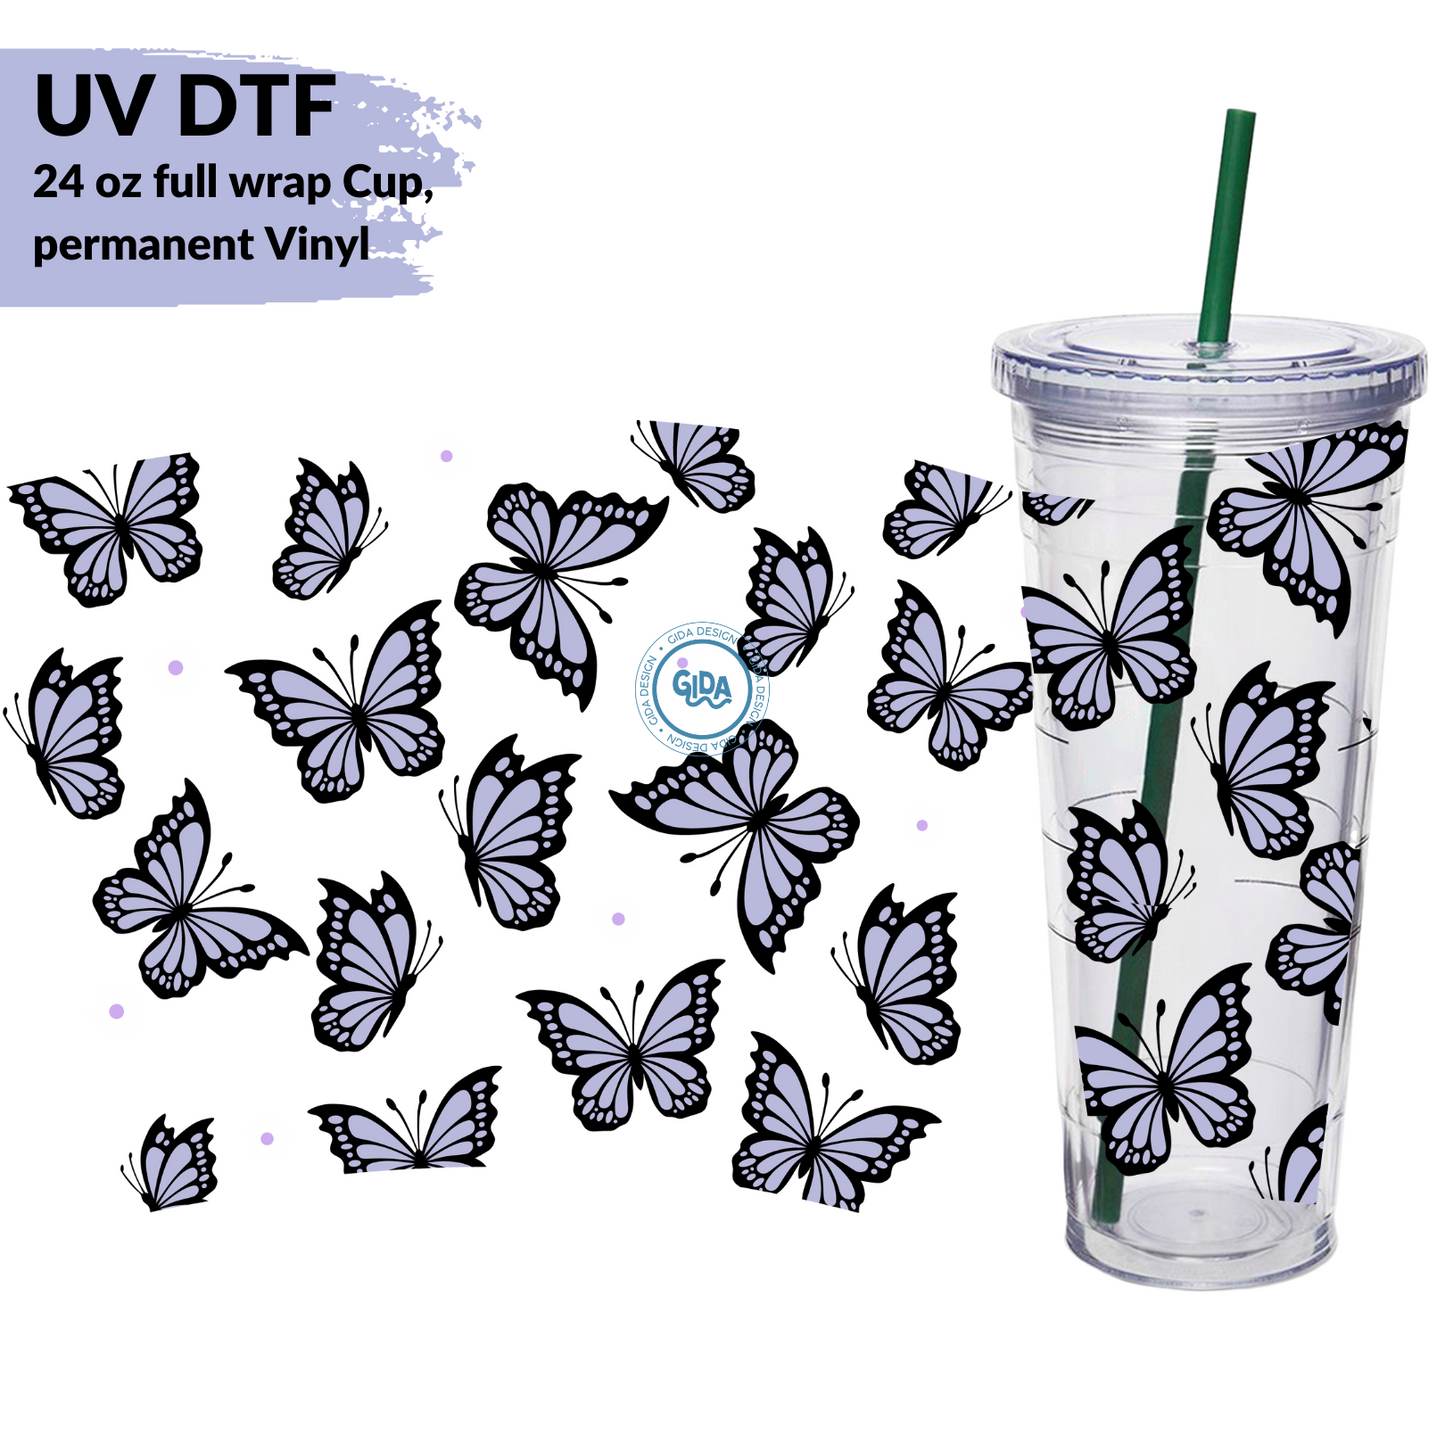 UV DTF - Purple Butterflies and Daisies 24 oz